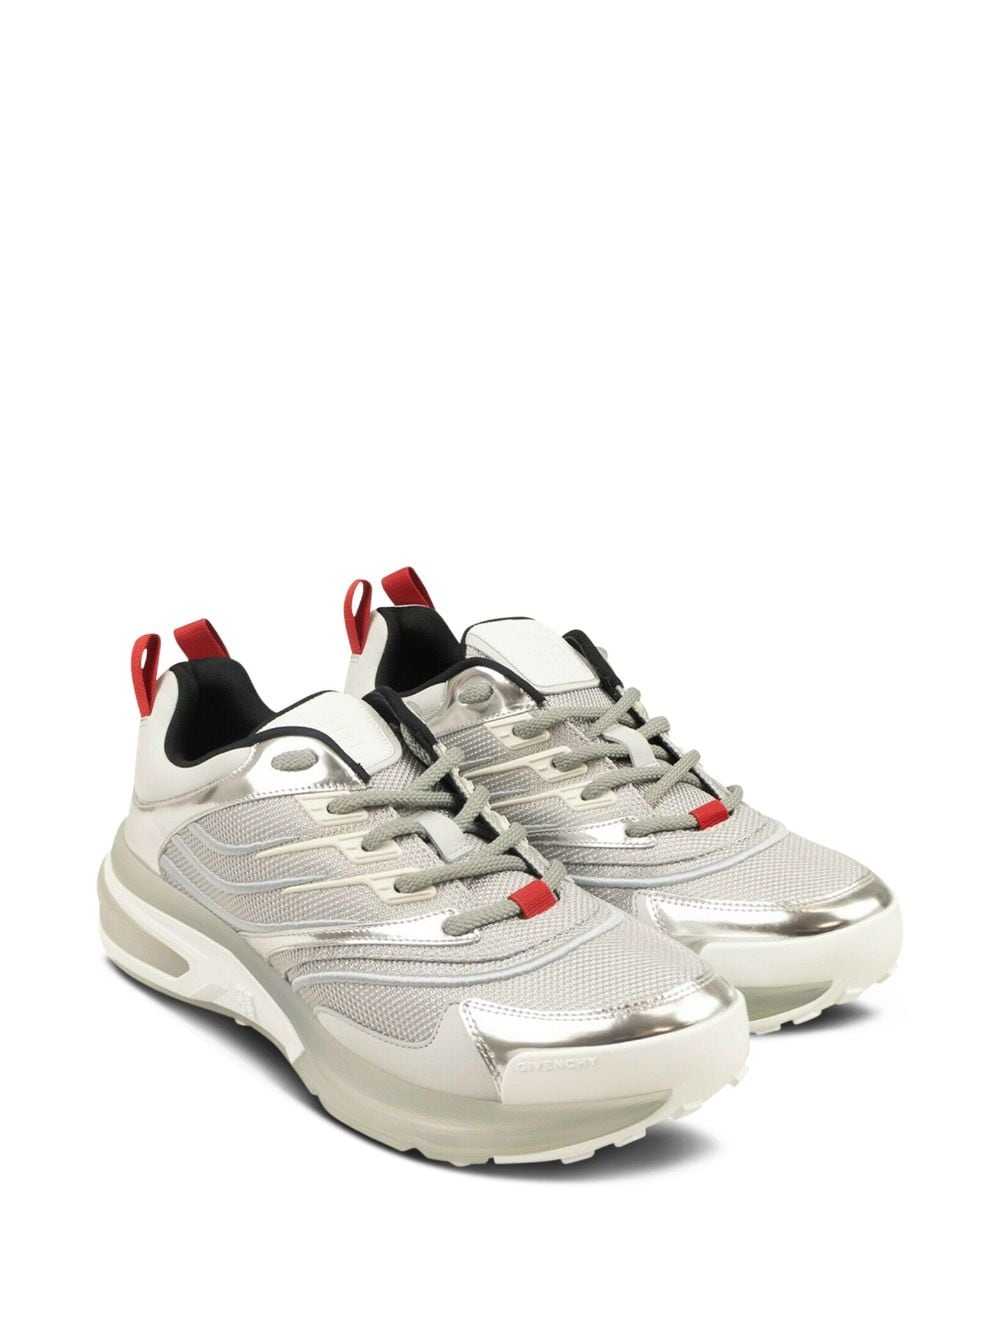 Shop Givenchy Giv 1 "silver" Sneakers